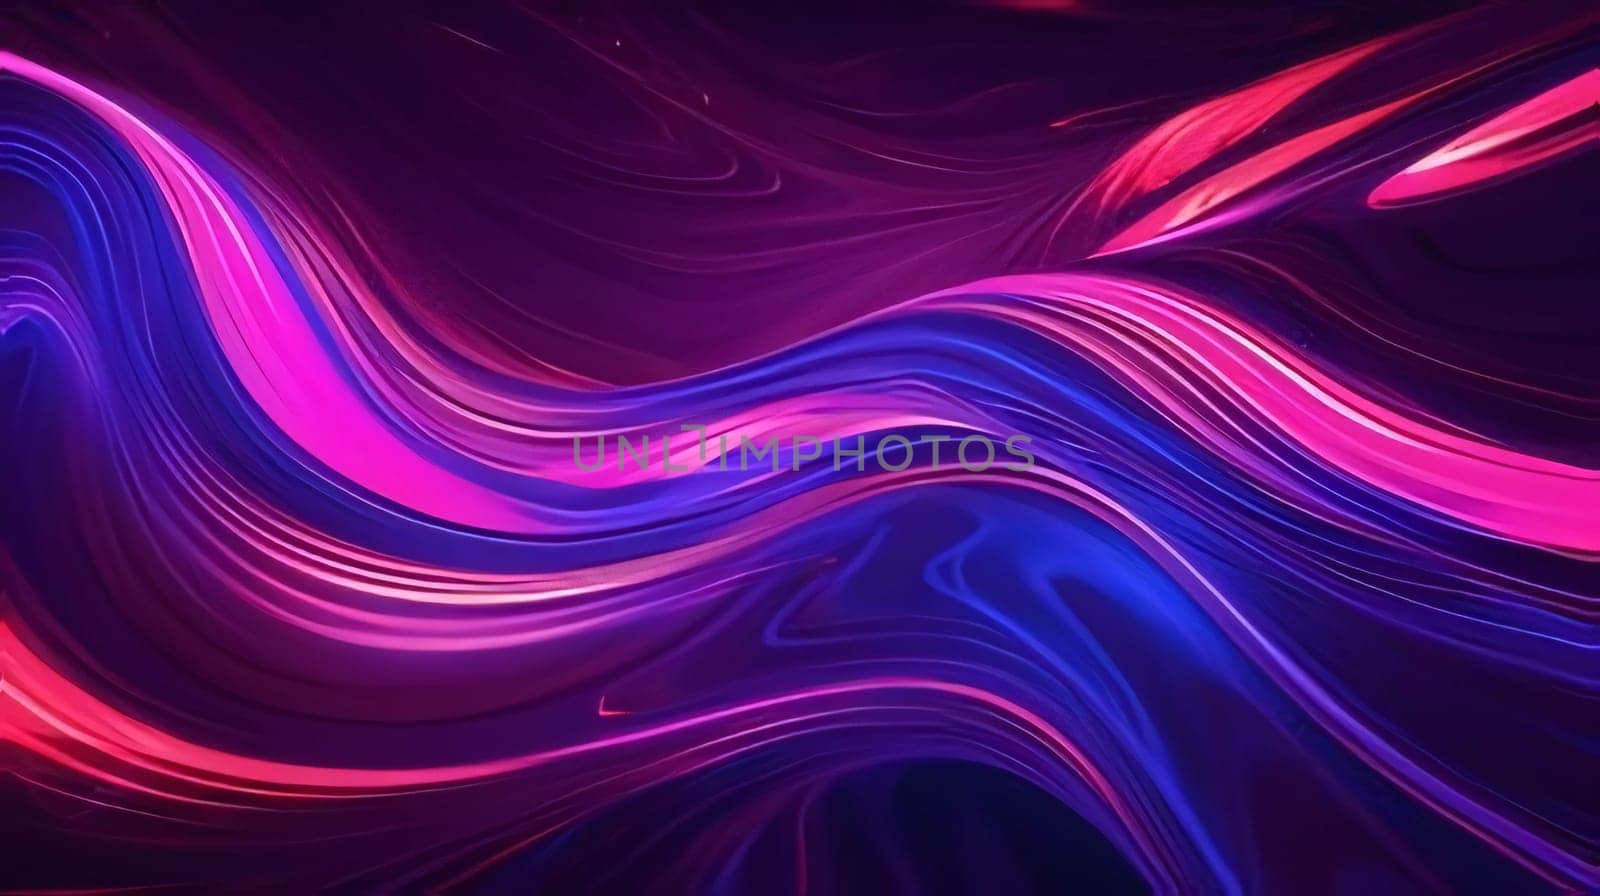 Abstract background design: abstract colorful background with smooth lines in purple and pink colors.